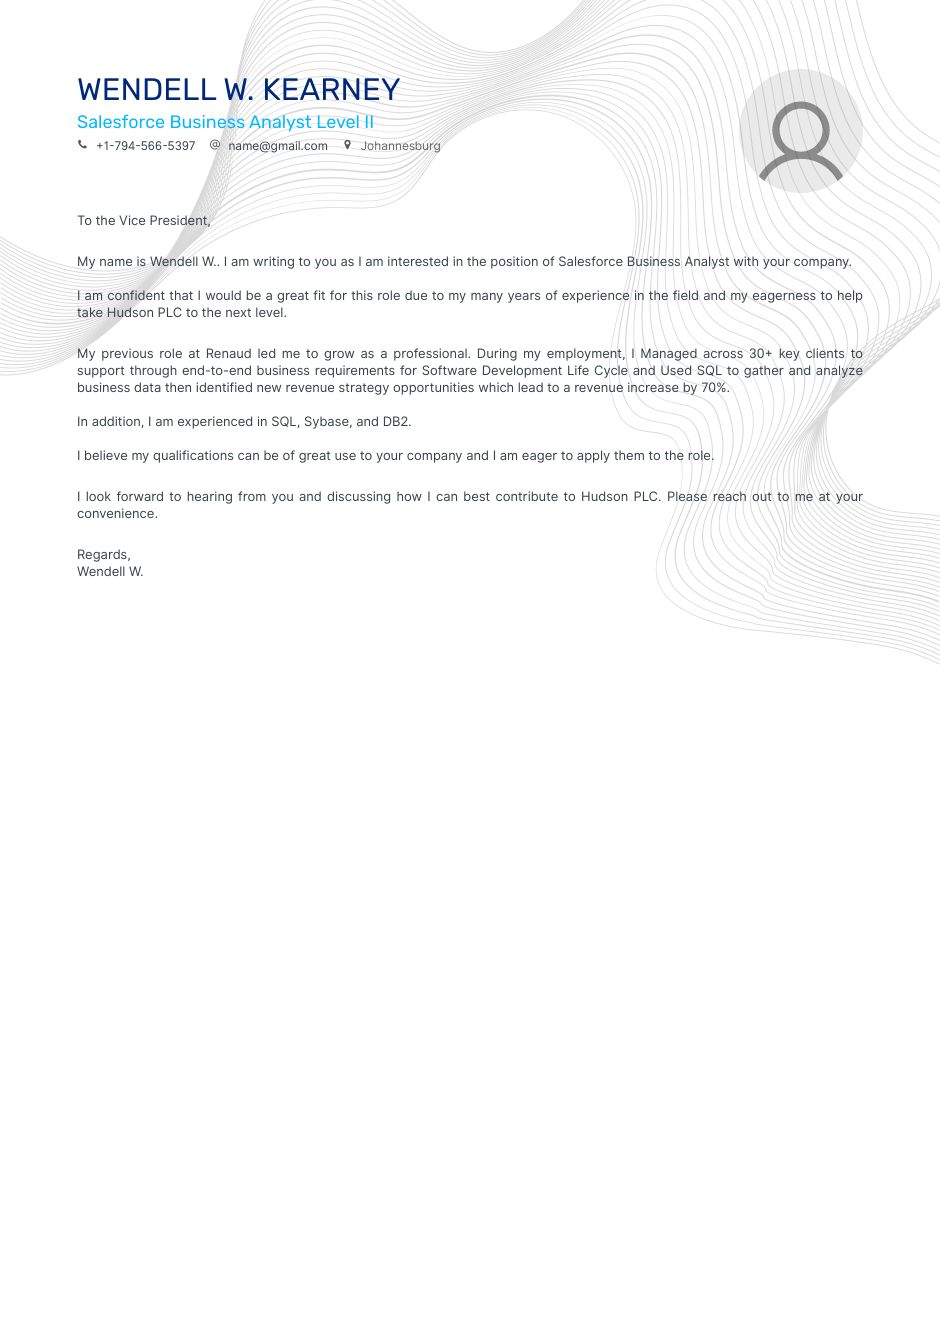 salesforce business analyst coverletter.png